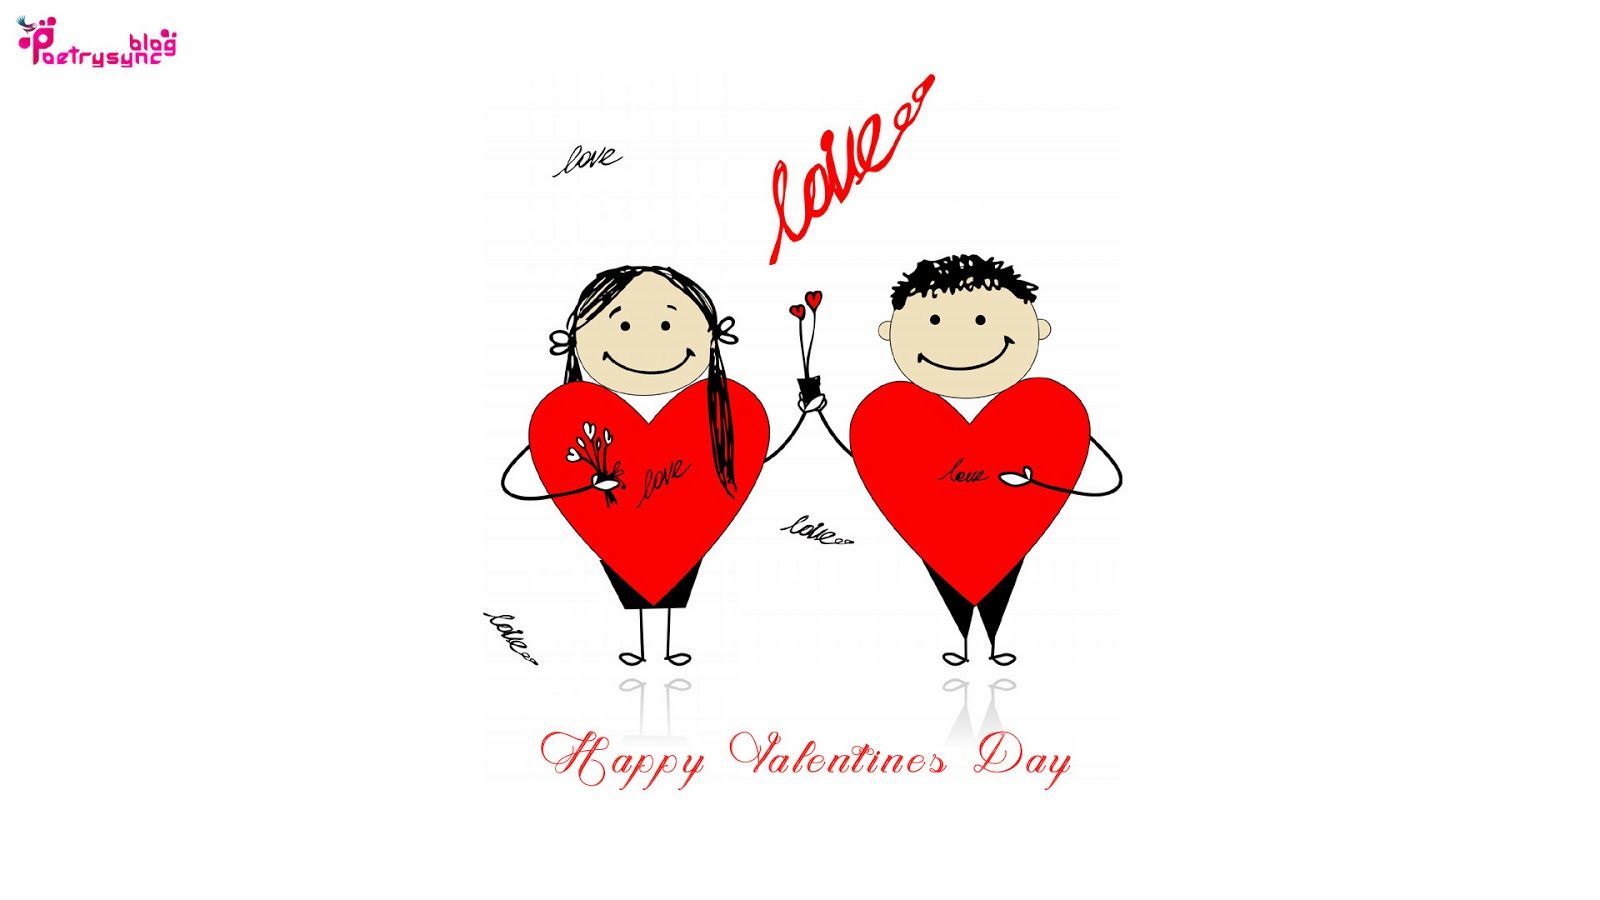 Happy Valentines Day Cartoons Couple Desktop Background Wallpaper Red Love Hearts Lovers Day. Happy valentines day sms, Valentines day greetings, Valentine text